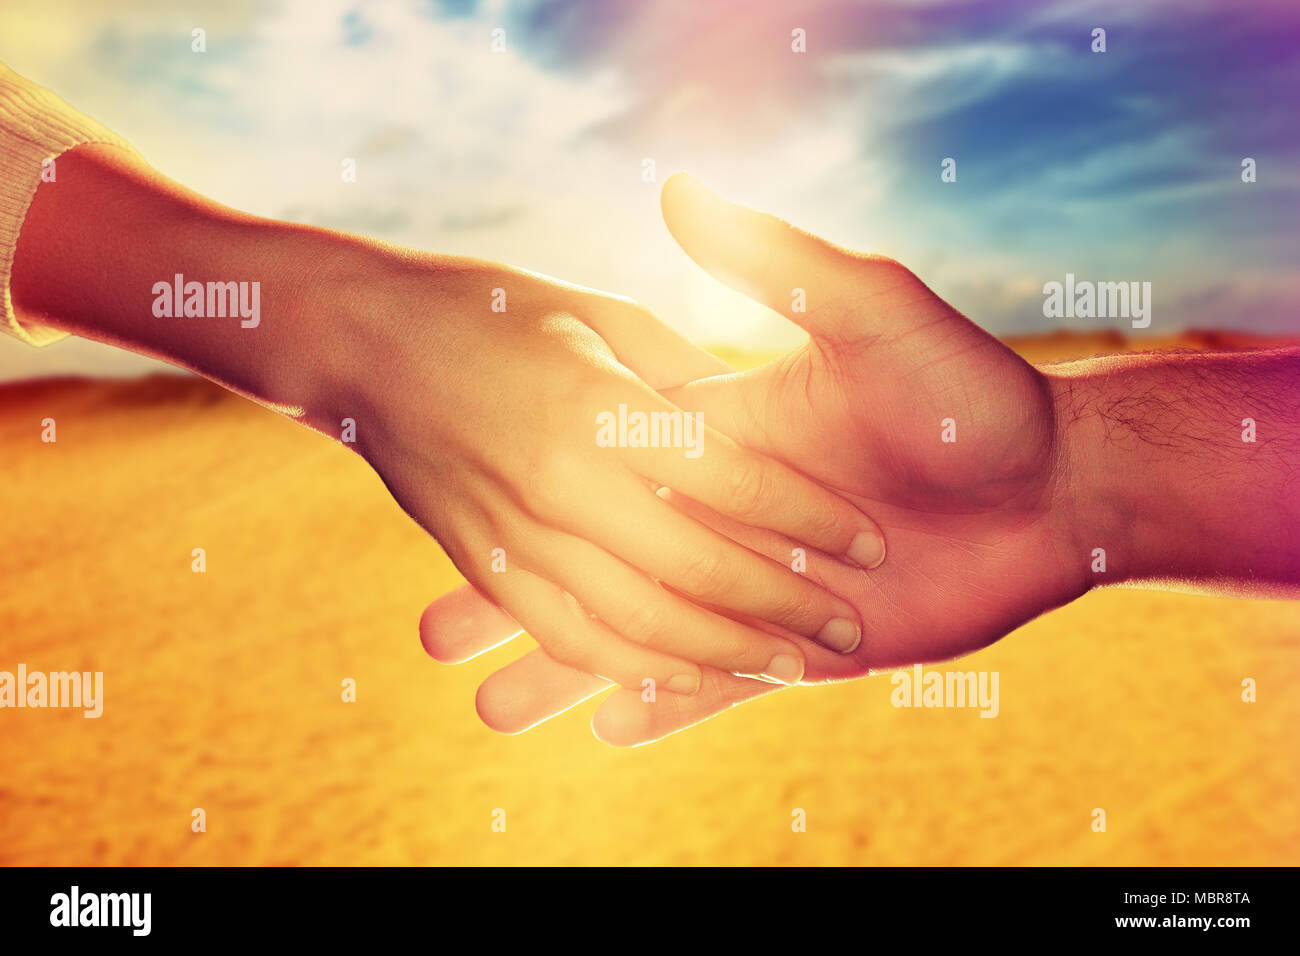 Touching hands - warm mood Stock Photo